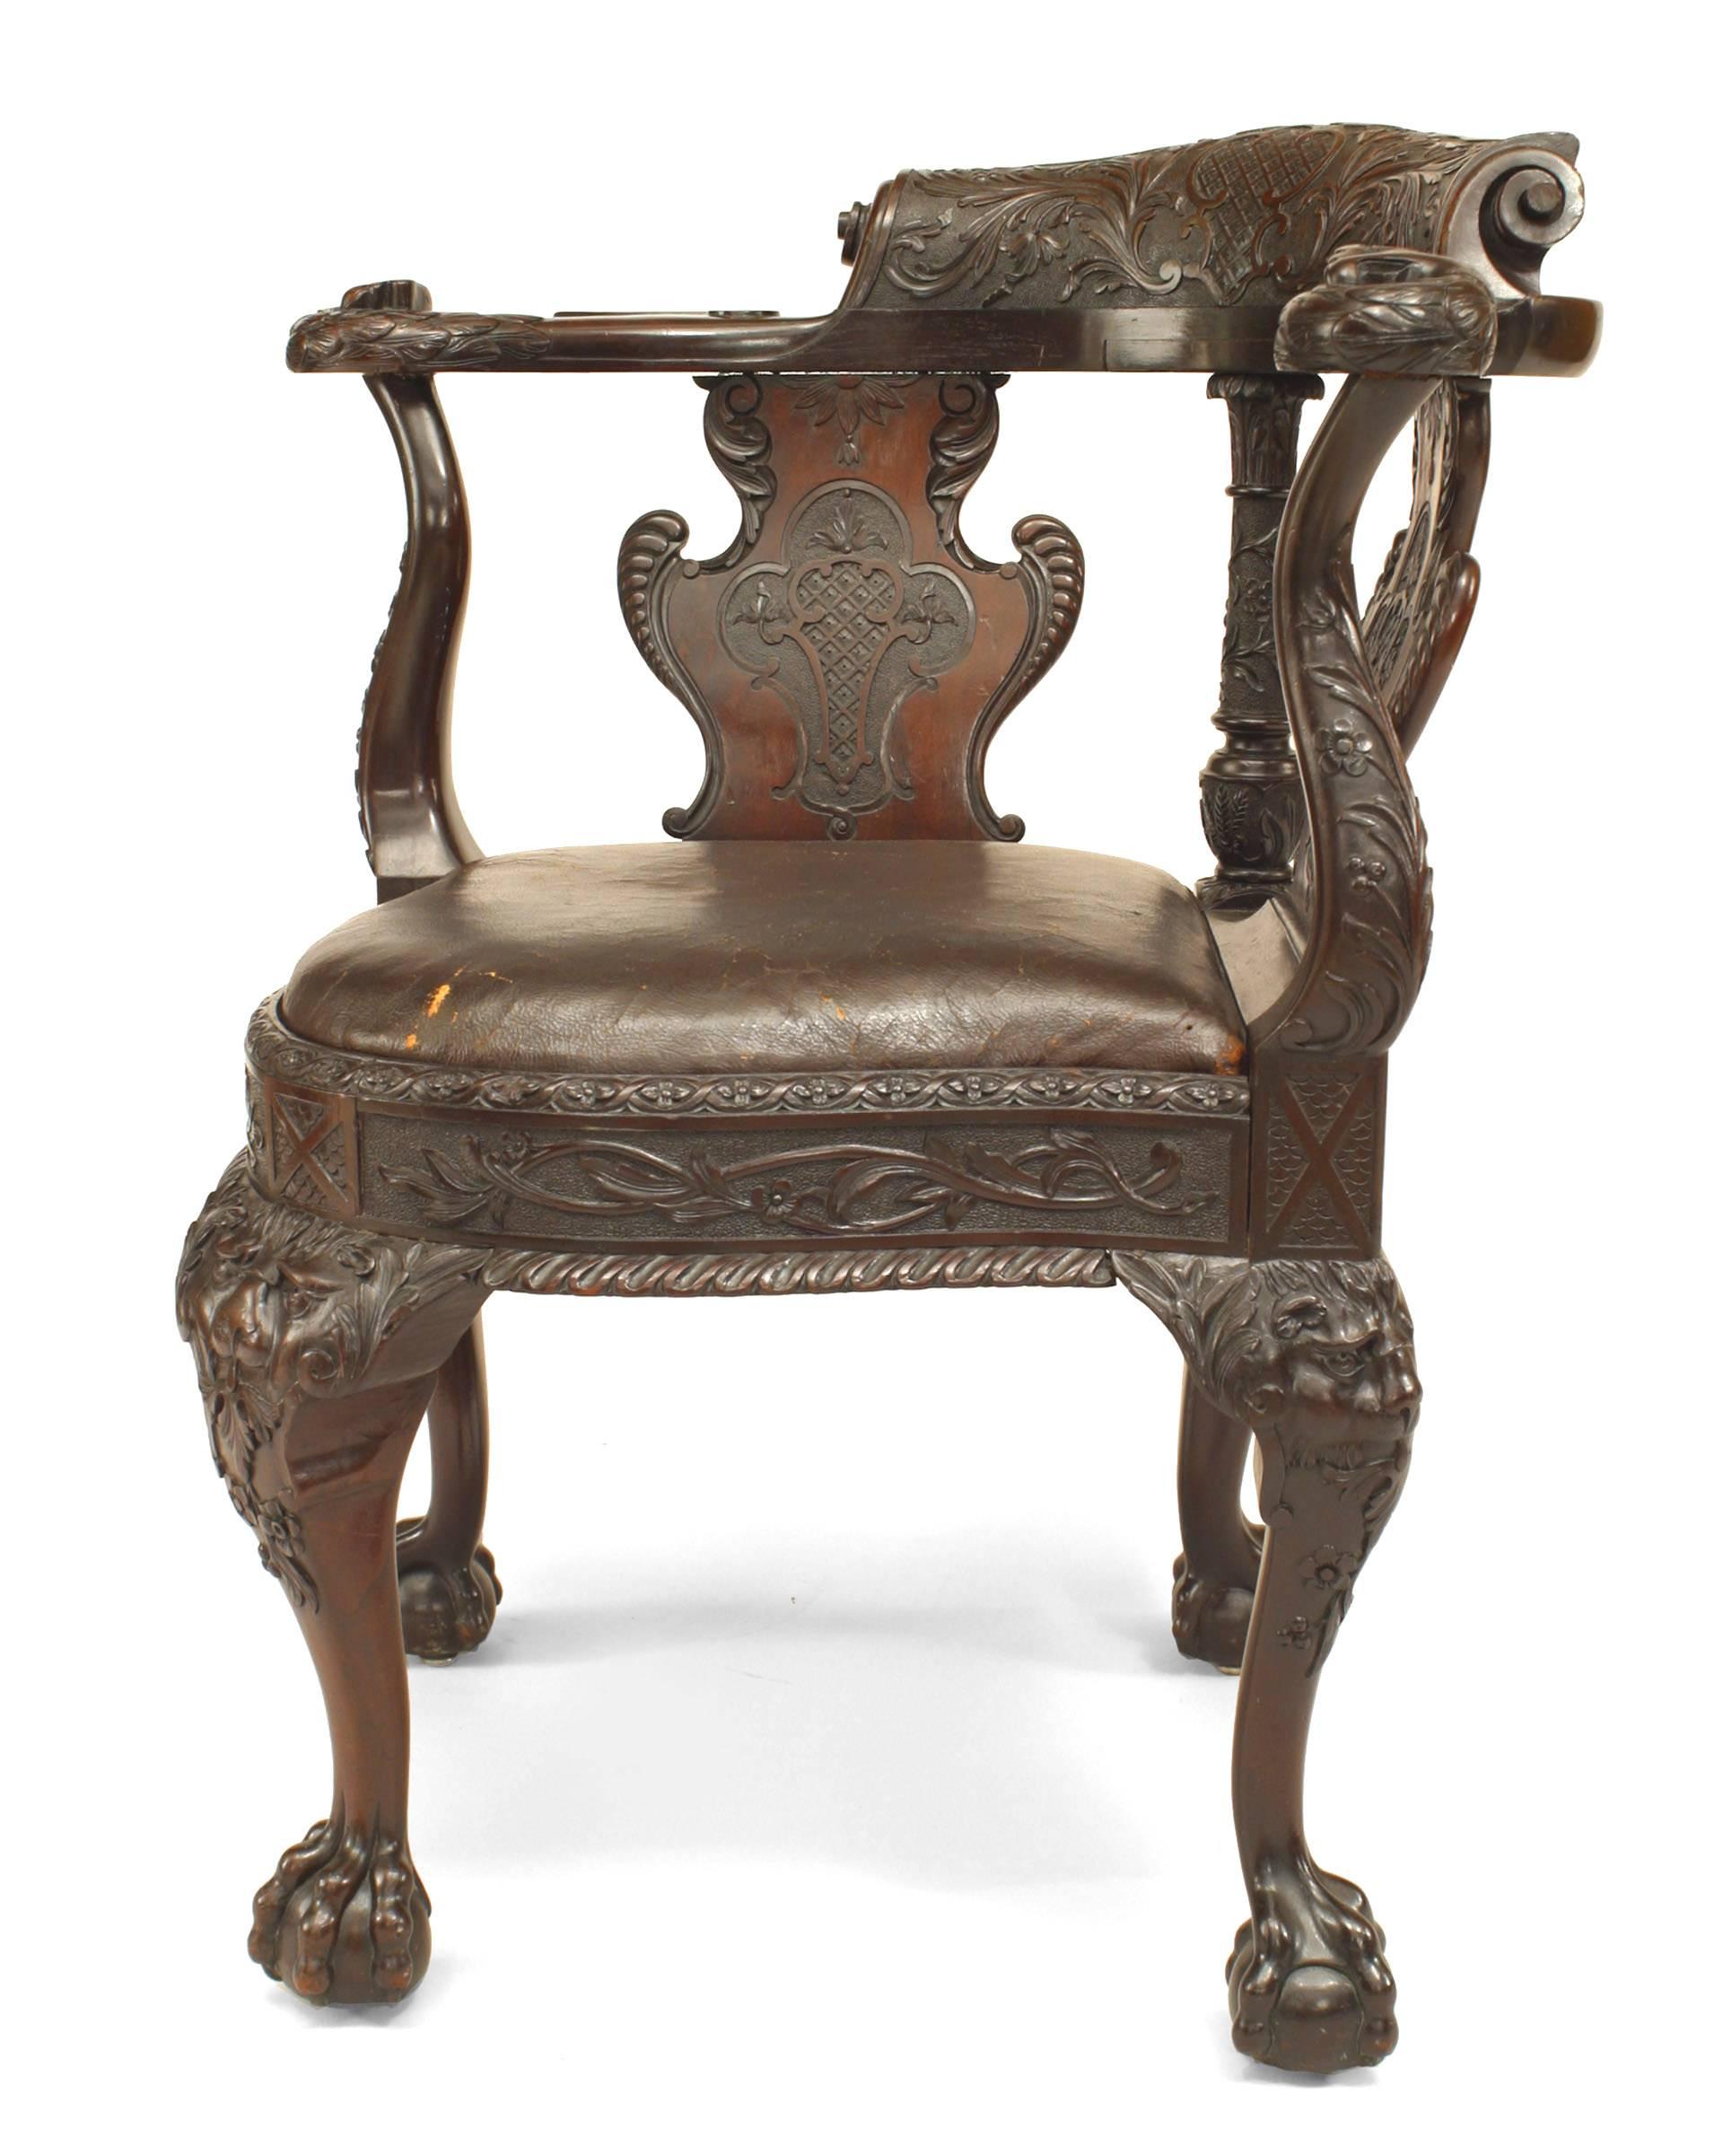 English Chippendale style (18th-19th century) carved mahogany shield splat back corner armchair with brown leather seat.
 